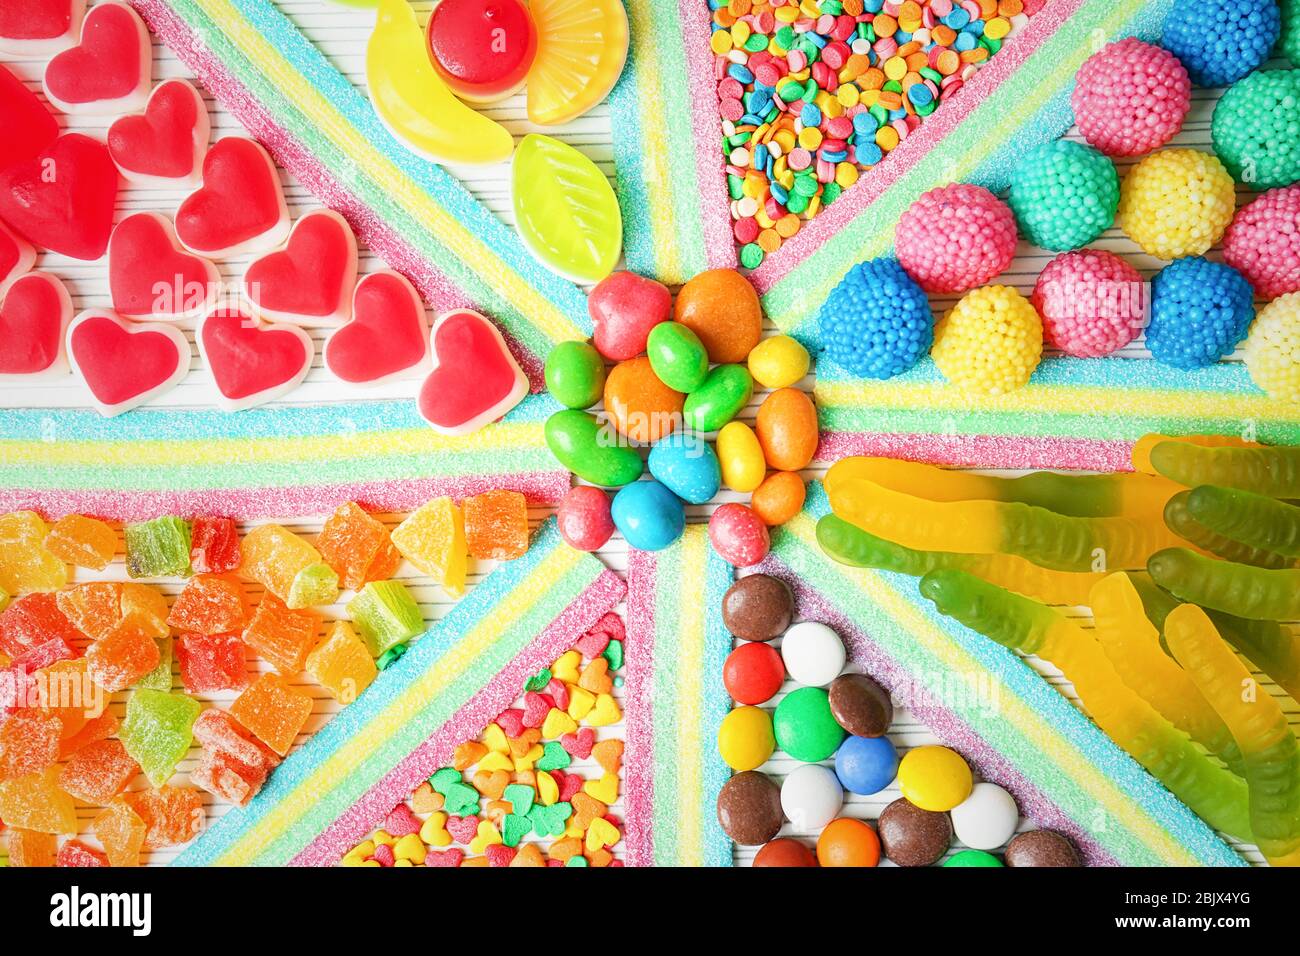 Colorful candies on light background Stock Photo